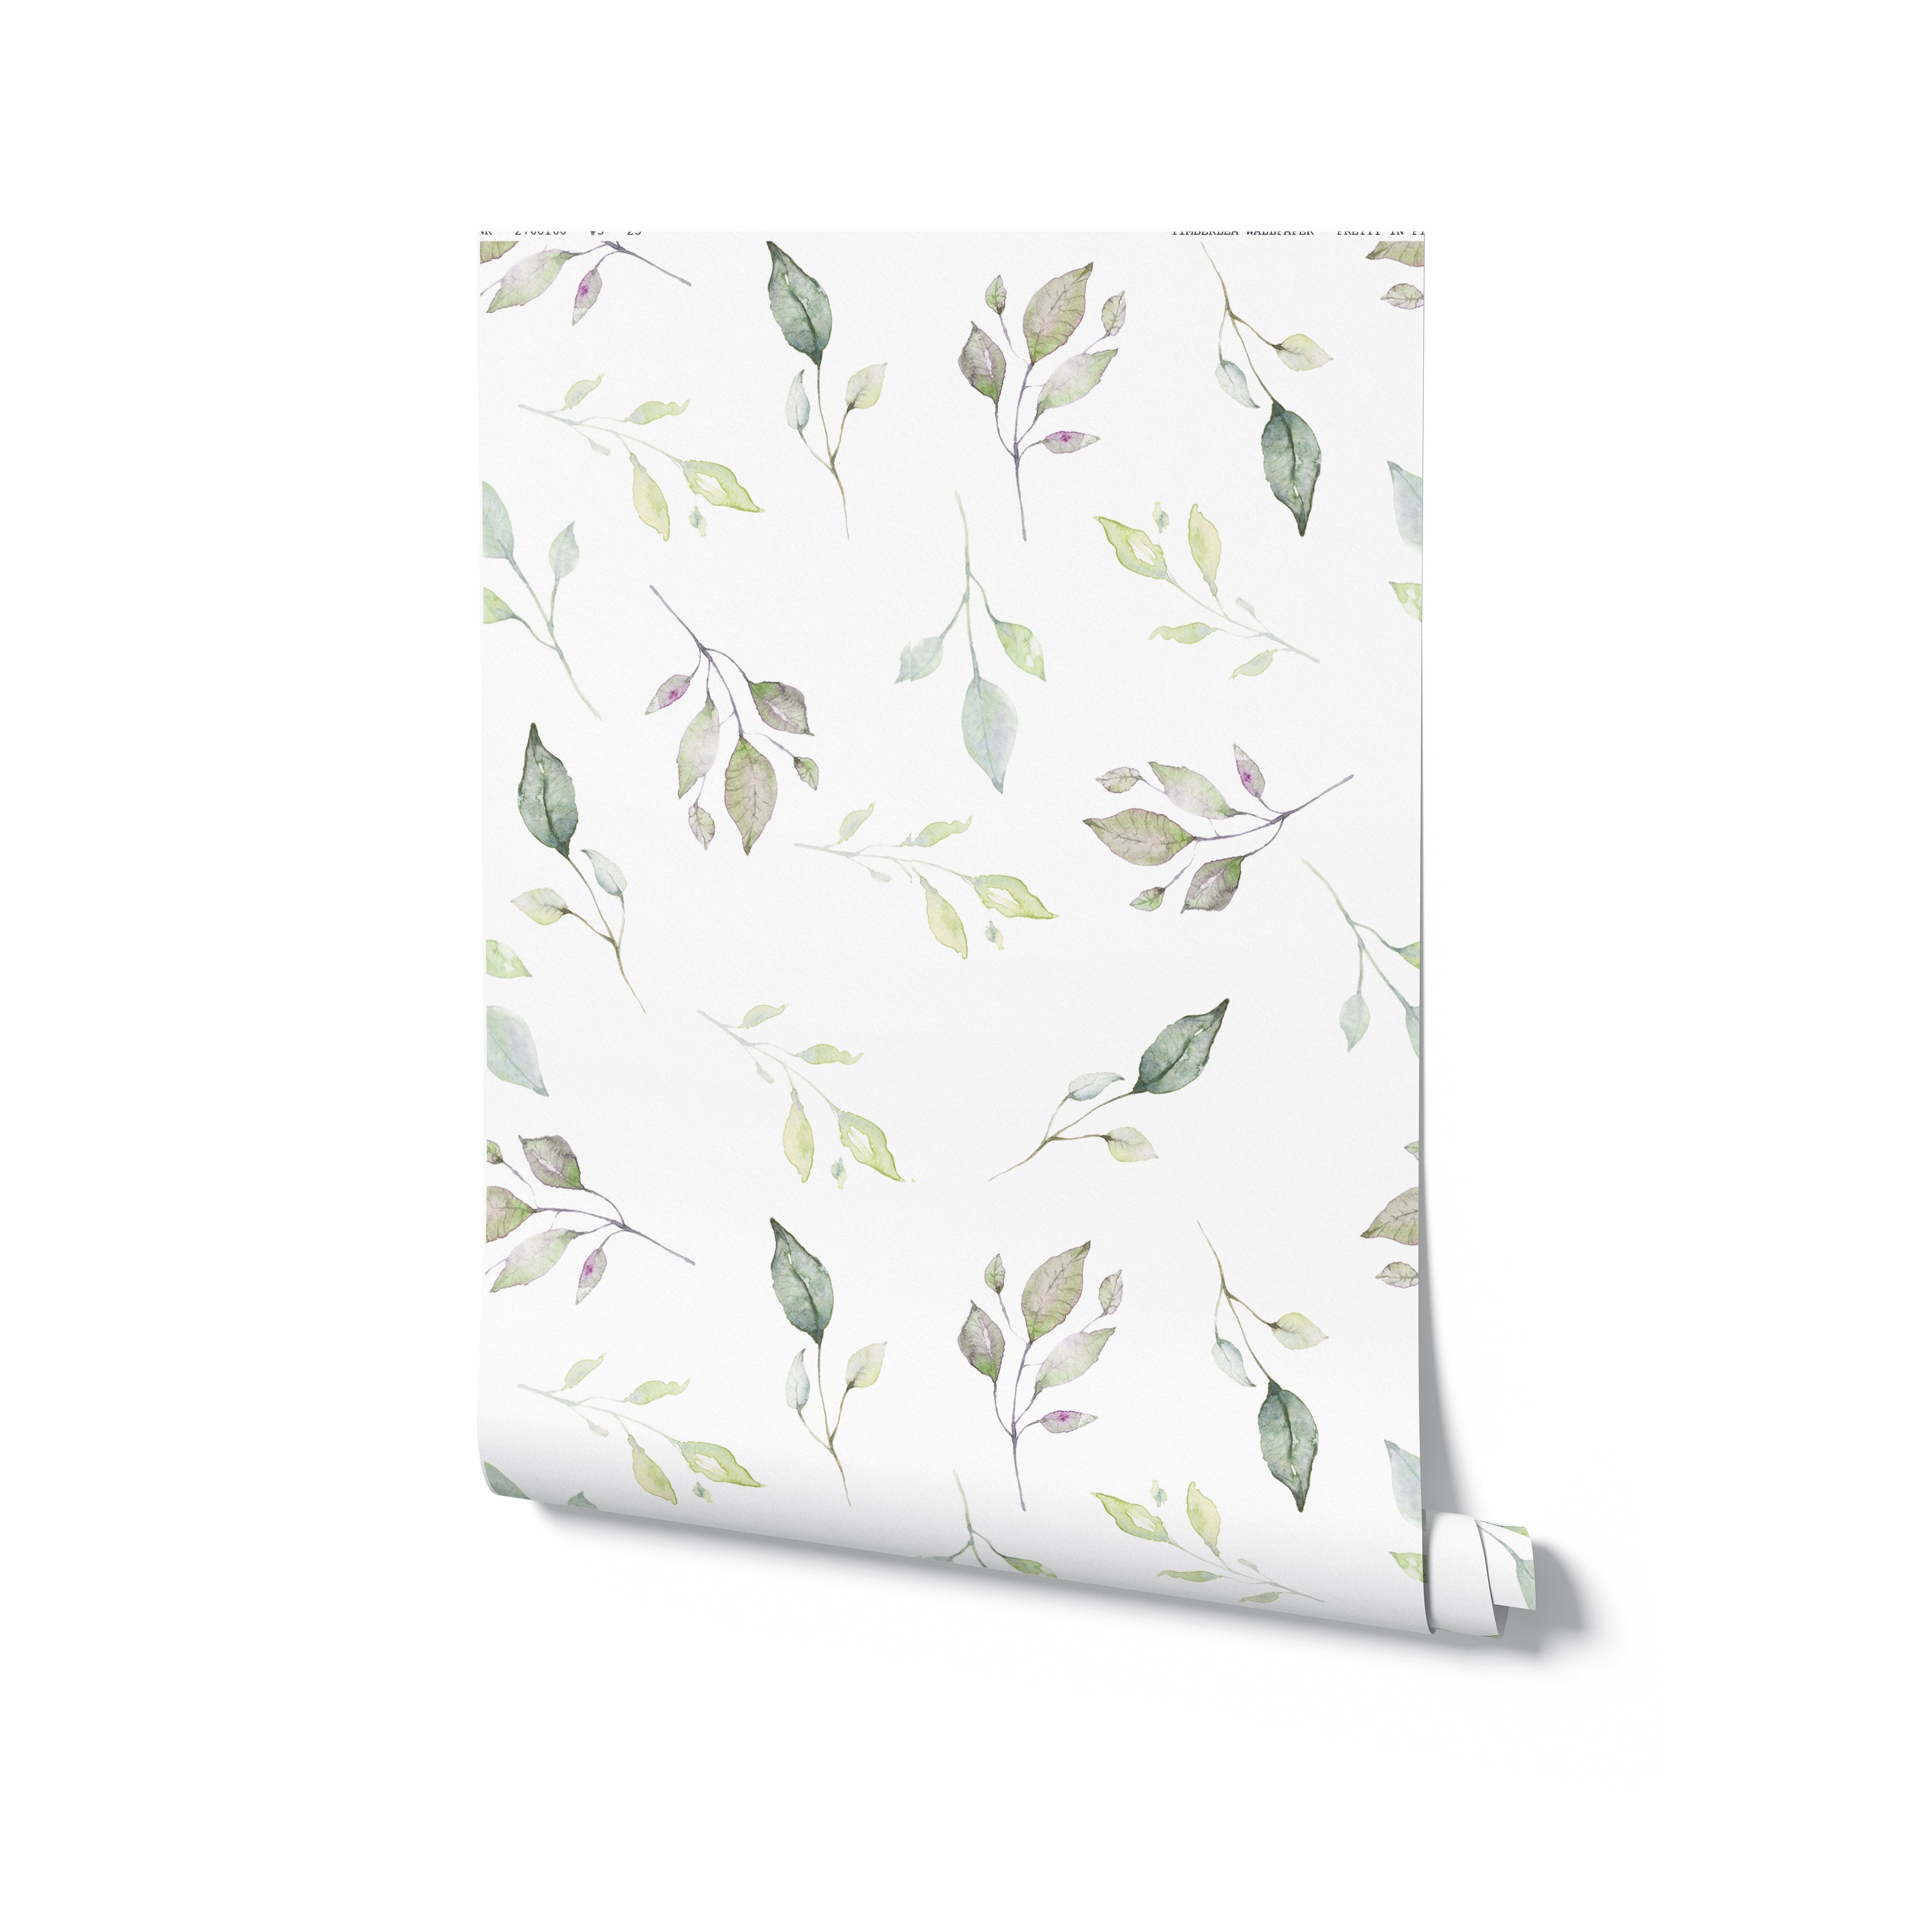 A rolled piece of 'Fall Floral Wallpaper', displaying a hand-painted leaf pattern with muted green, purple, and yellow tones on a white base. The design conveys a sense of autumnal grace, perfect for creating a soothing and naturalistic decor theme.